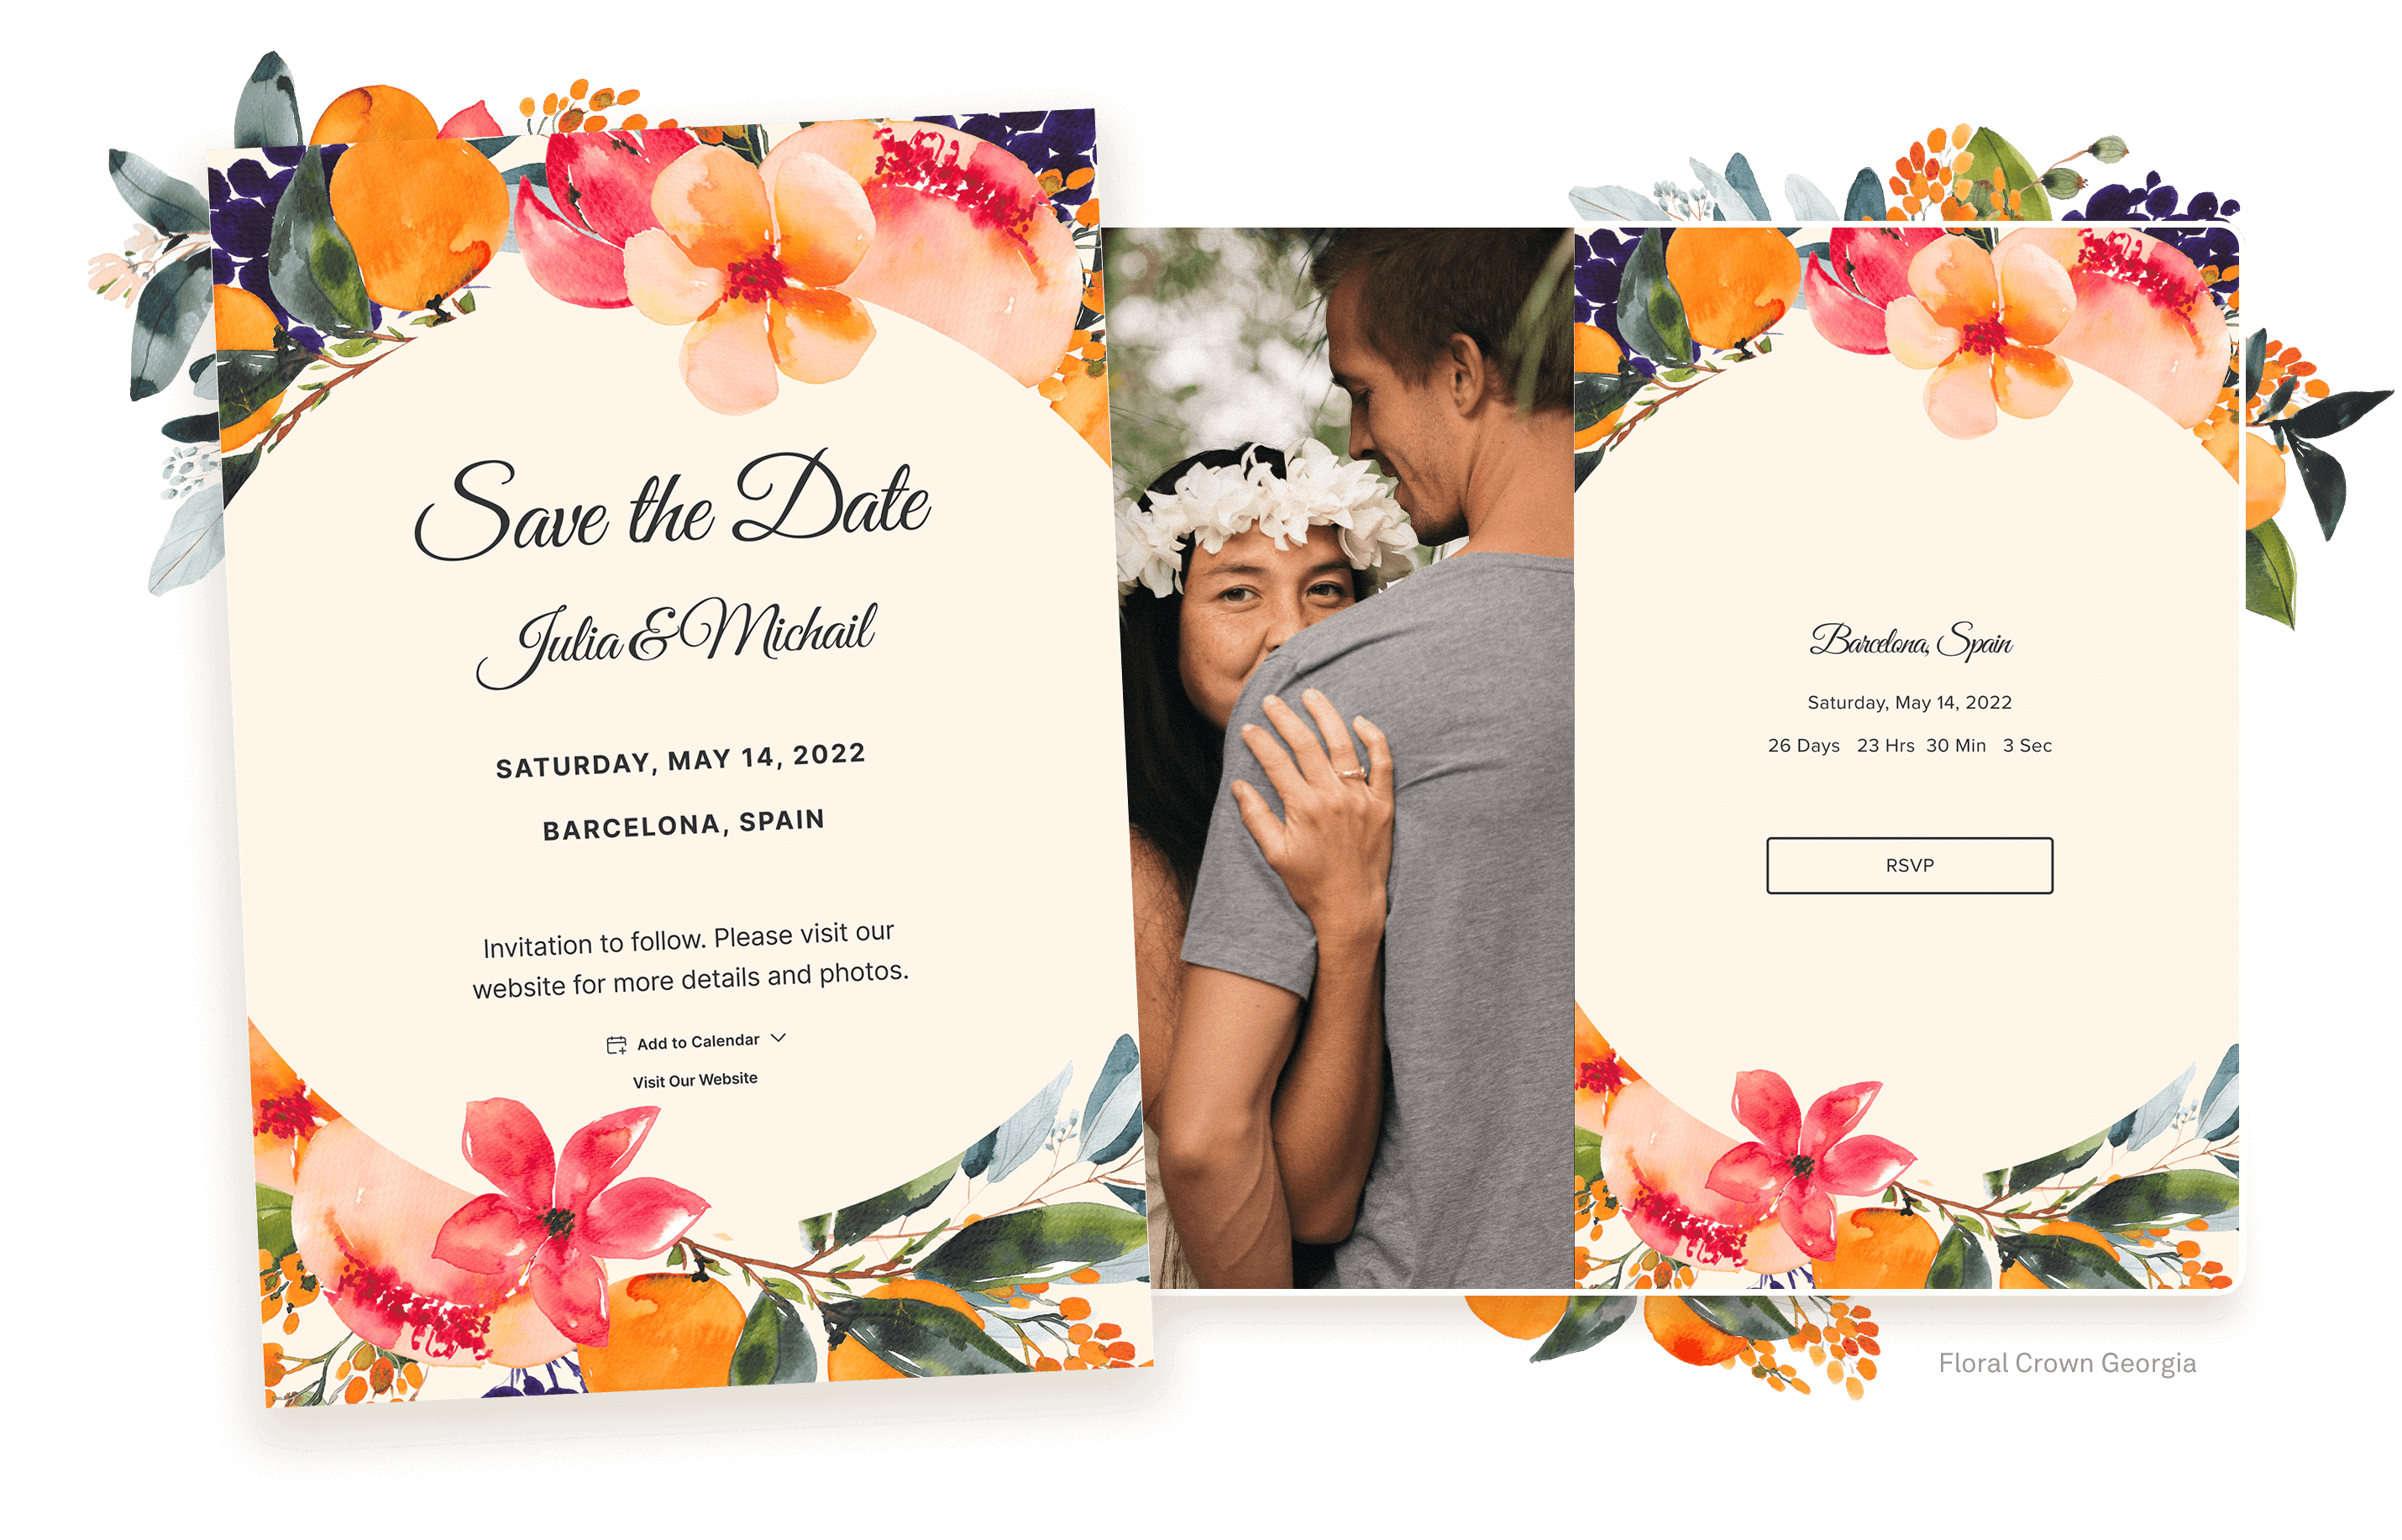 Save the Date example